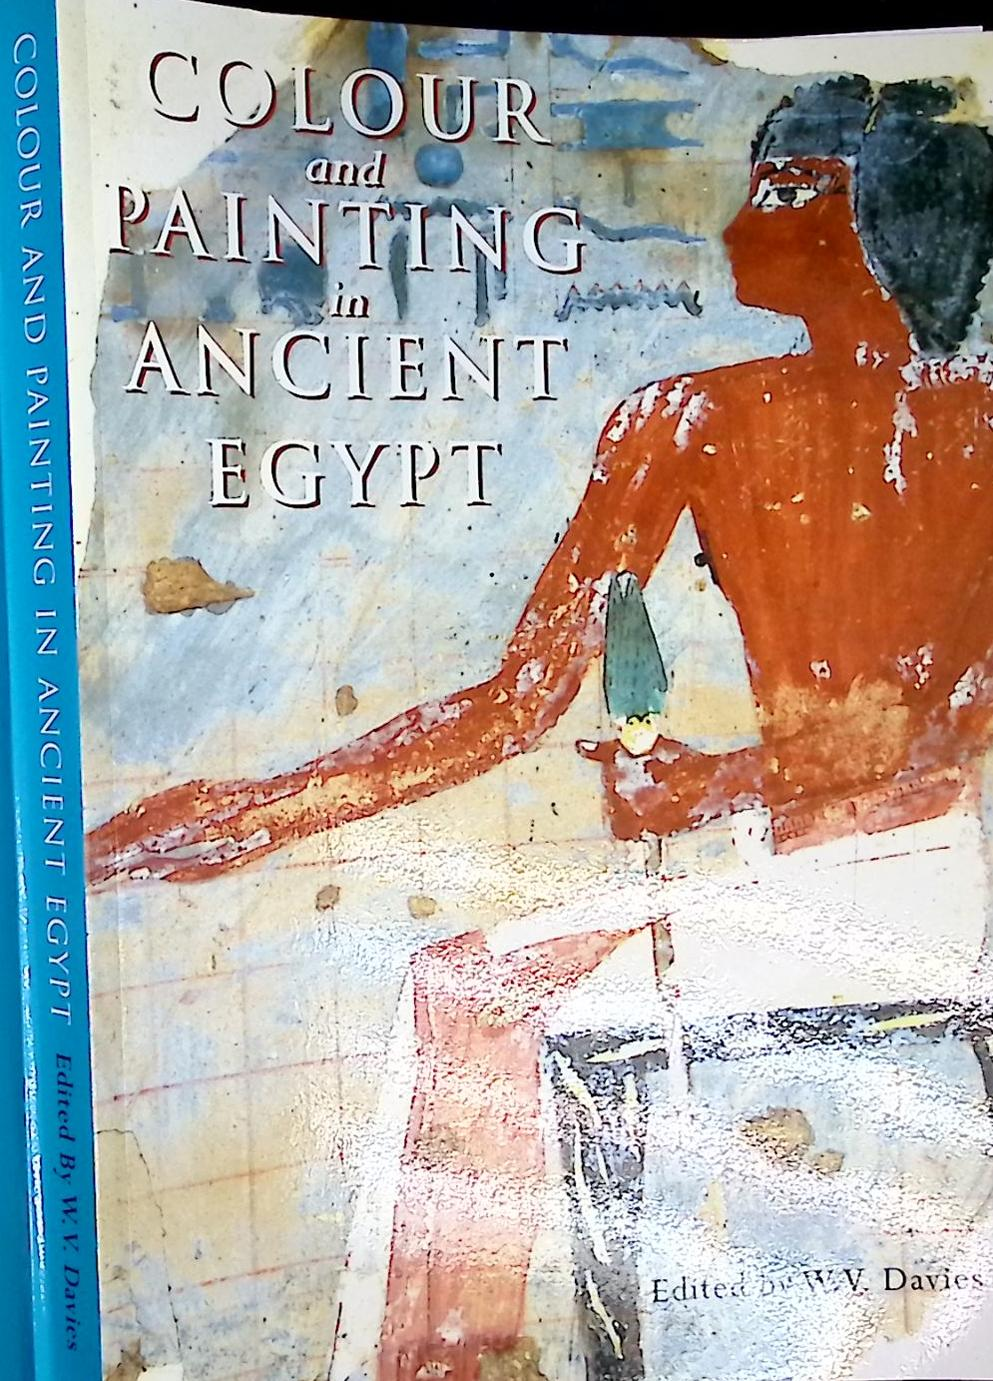 Colour and Painting in Ancient Egypt